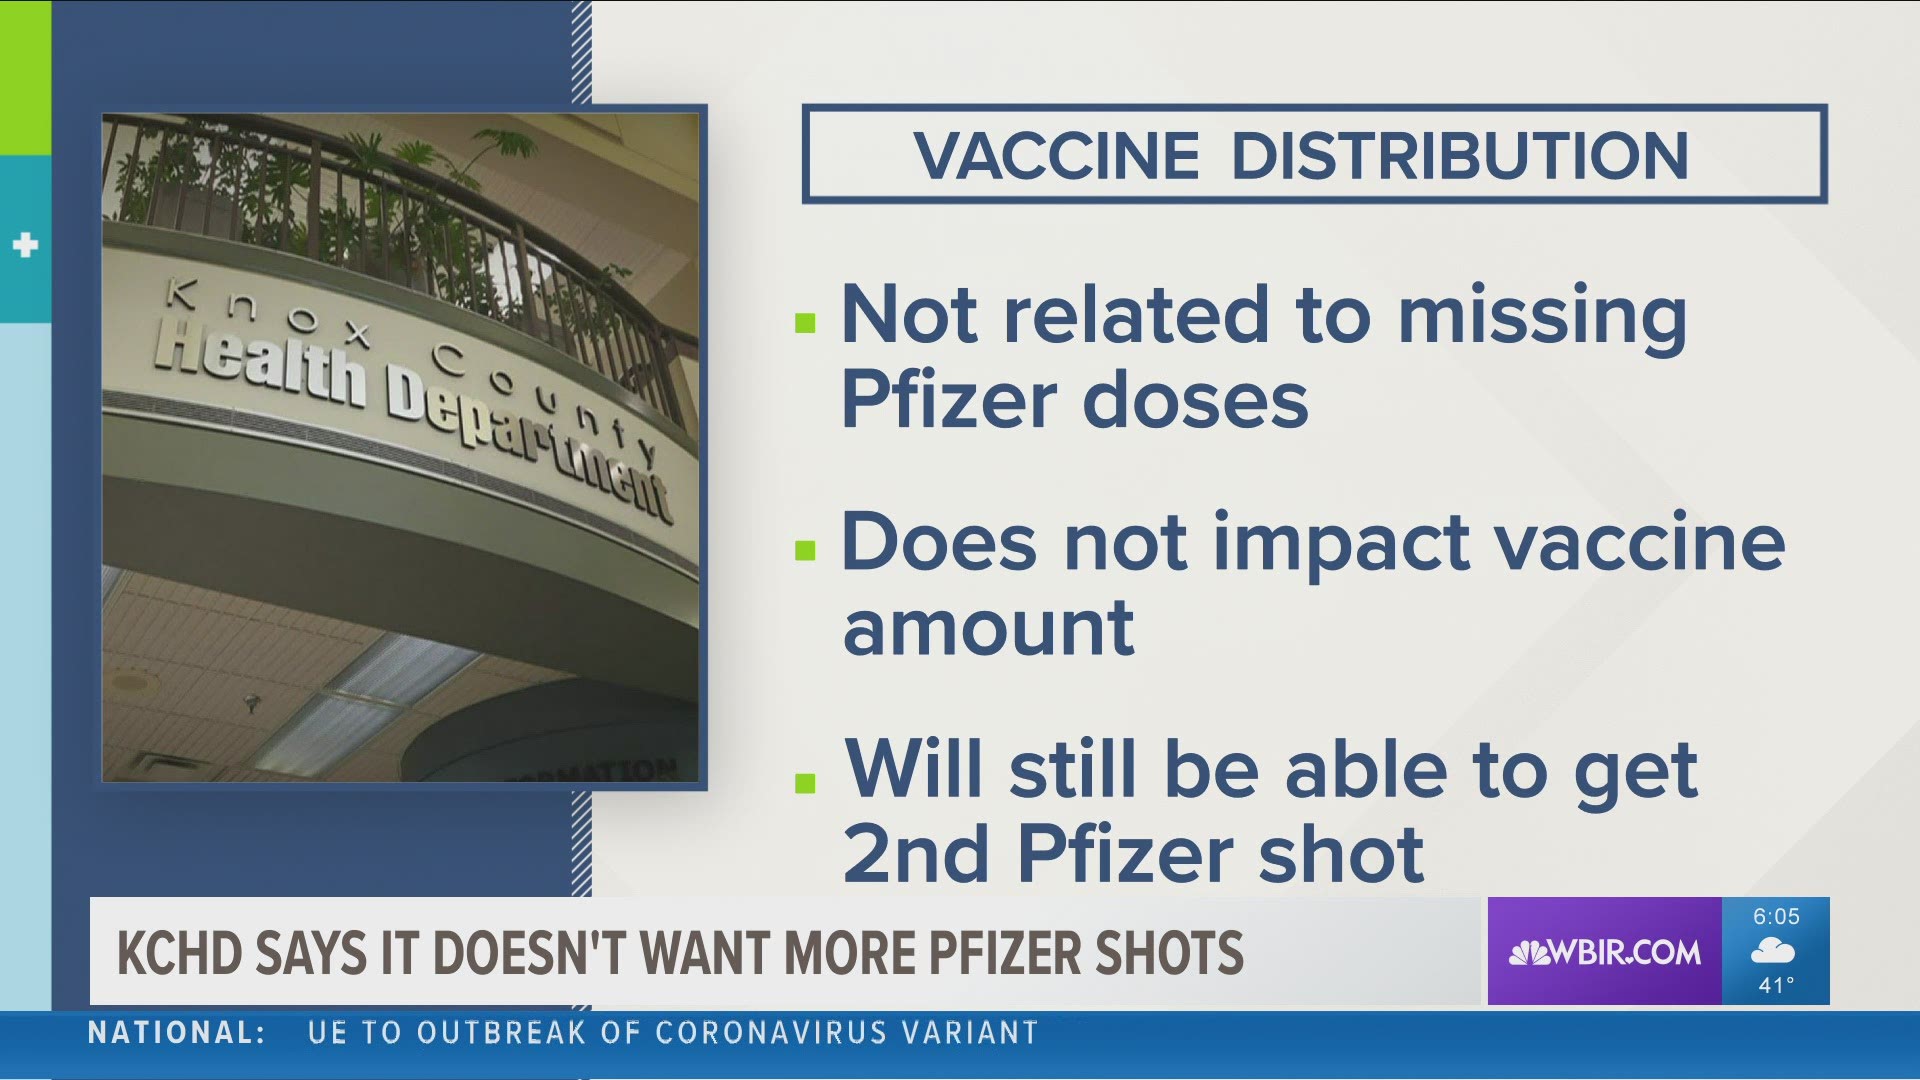 KCHD said it prefers the Moderna vaccine because it's easier to store. People who received the Pfizer vaccine will still be able to receive the second dose of it.